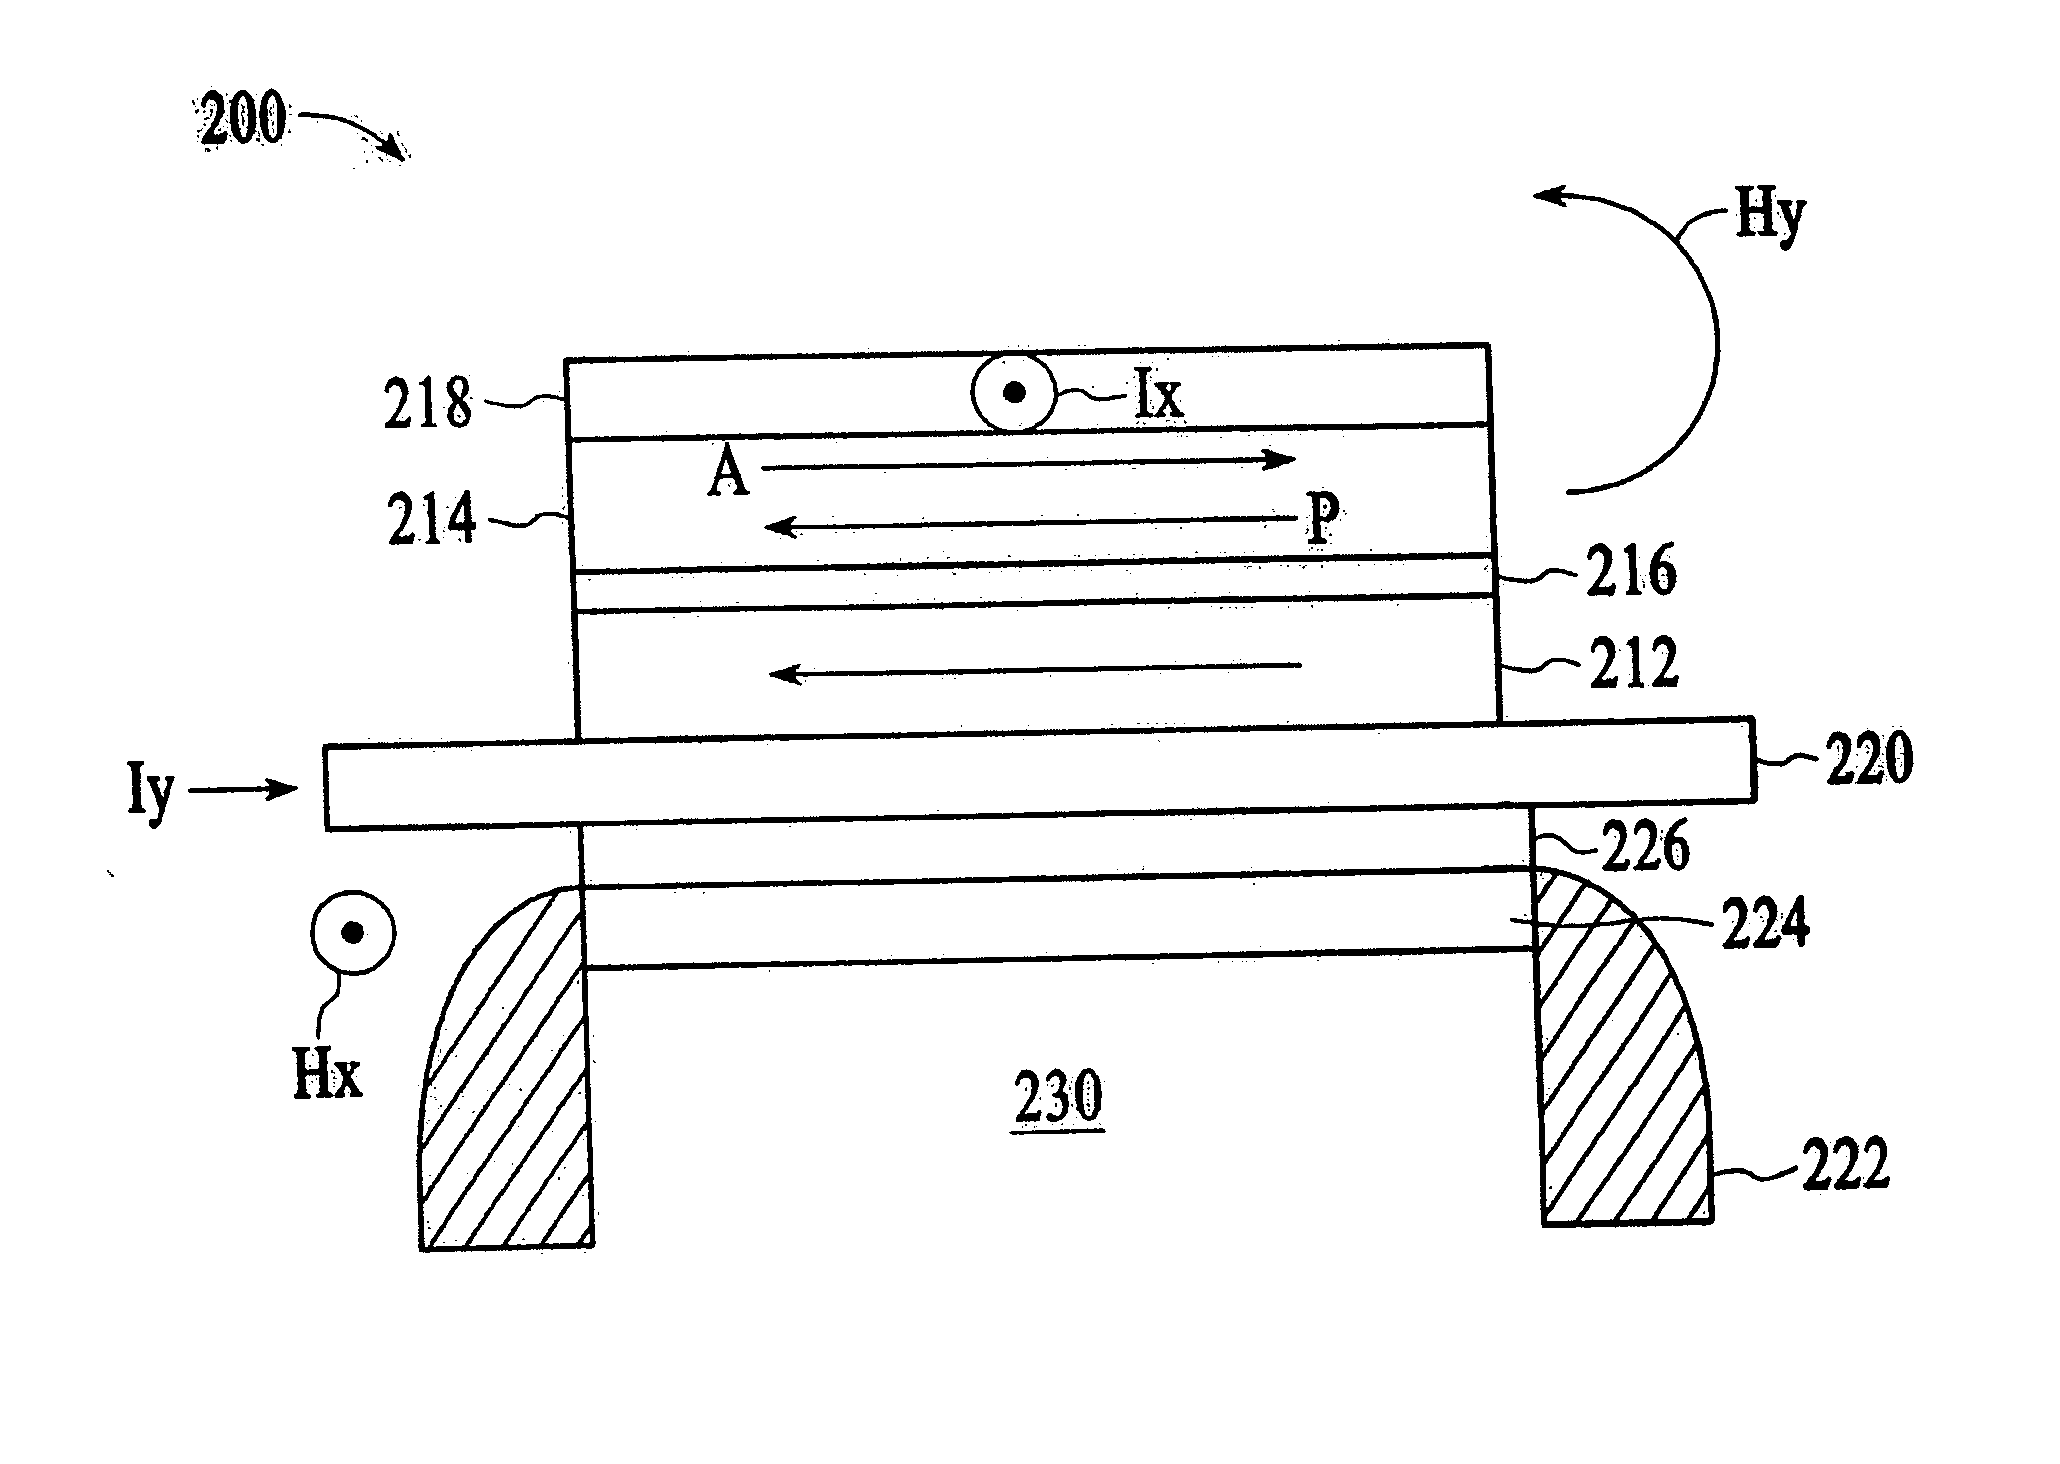 Thin film device and a method of providing thermal assistance therein